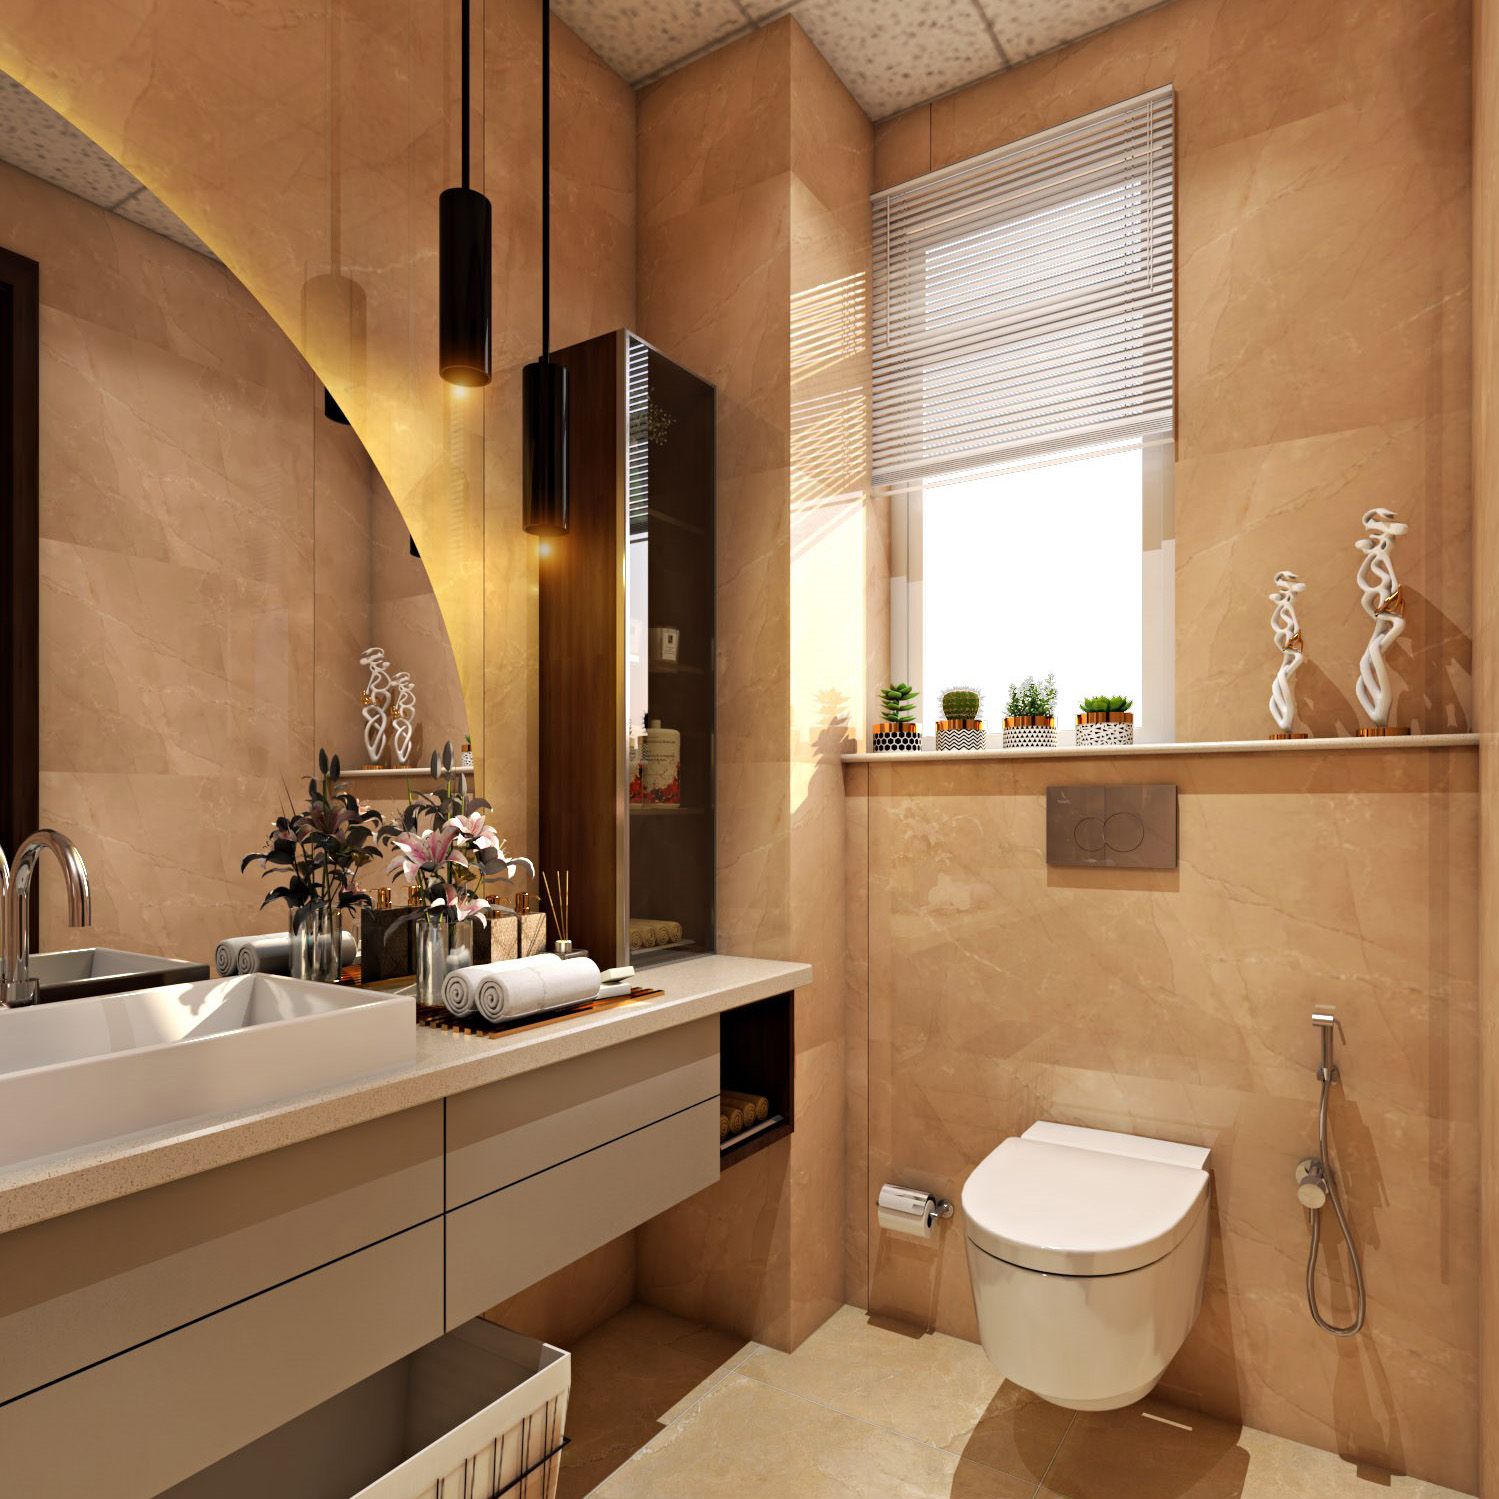 Contemporary Glossy Marble Bathroom Tile Design In Beige